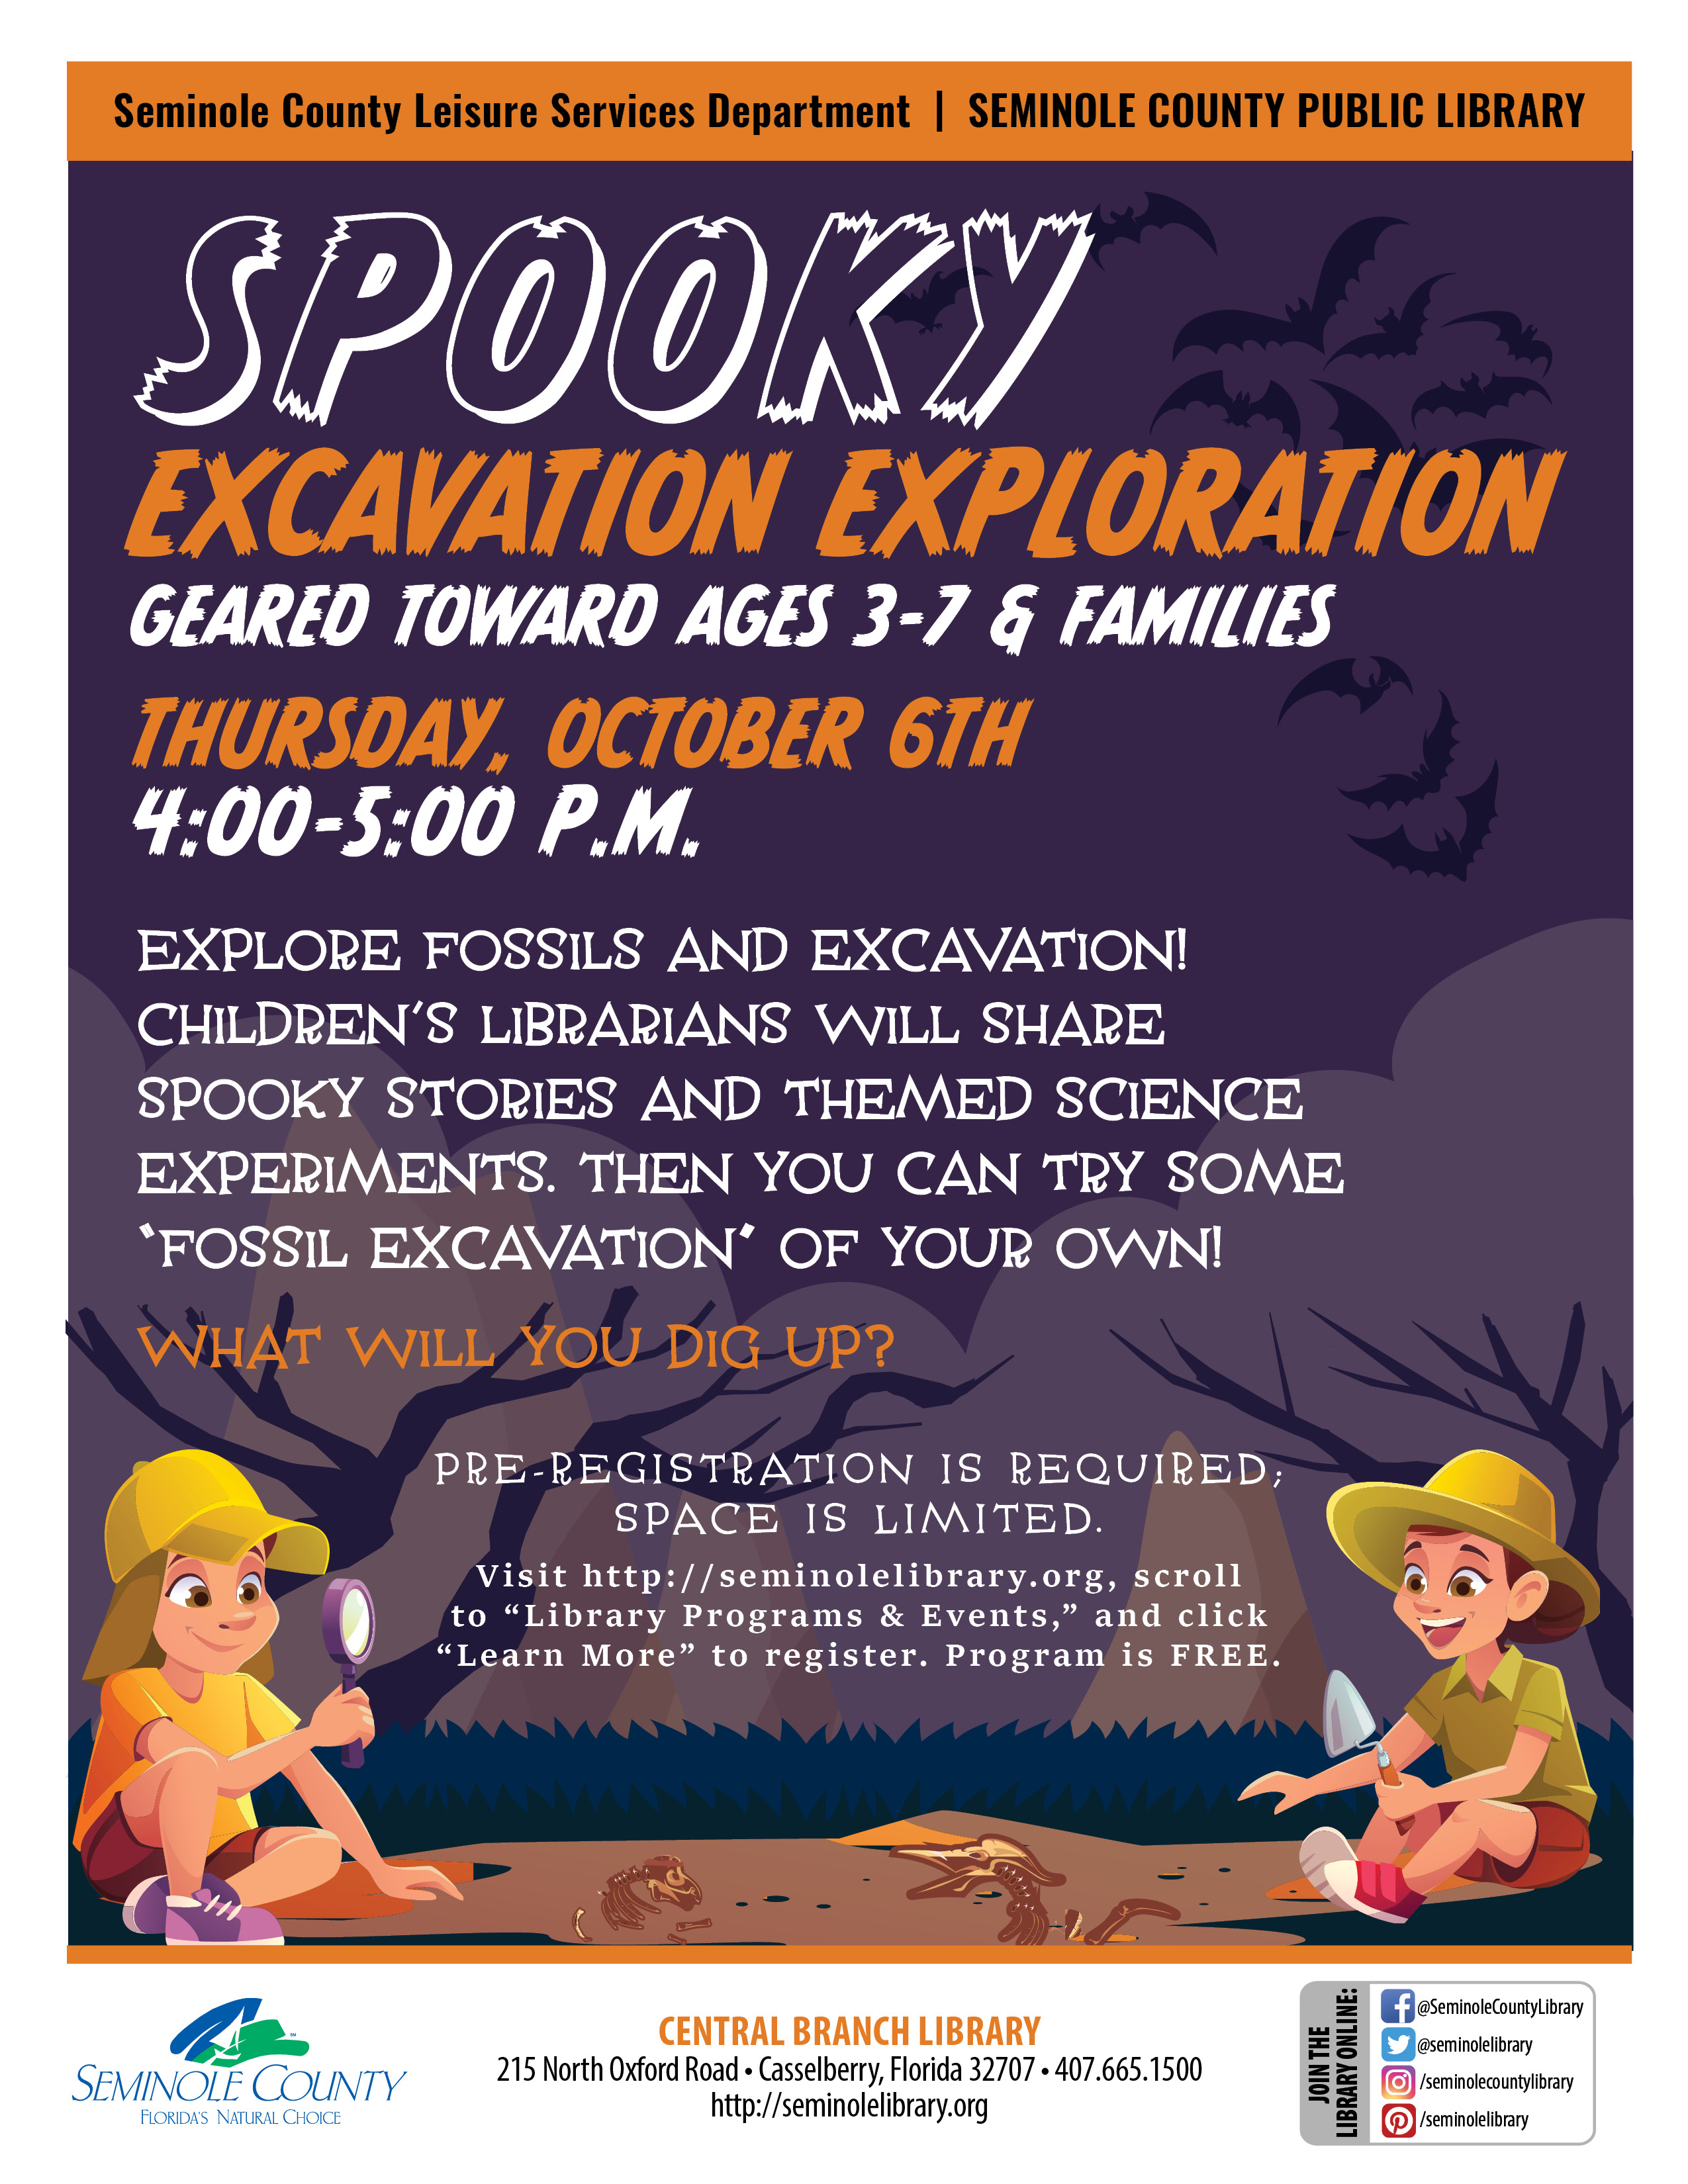 Spooky Excavation Exploration at the Central Branch Library